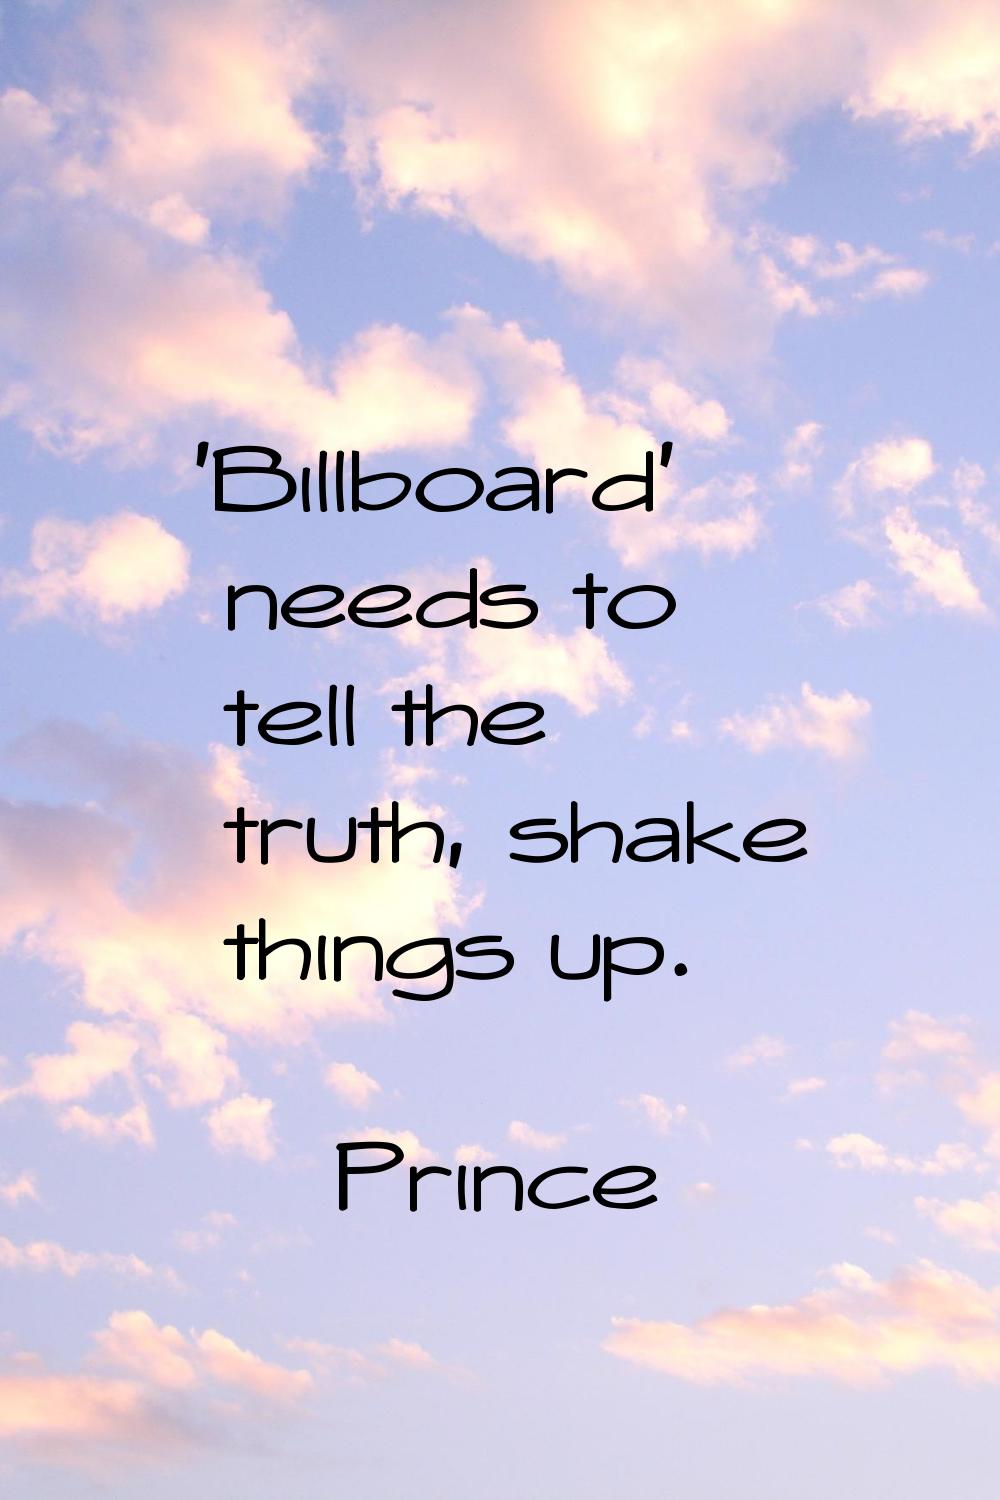 'Billboard' needs to tell the truth, shake things up.